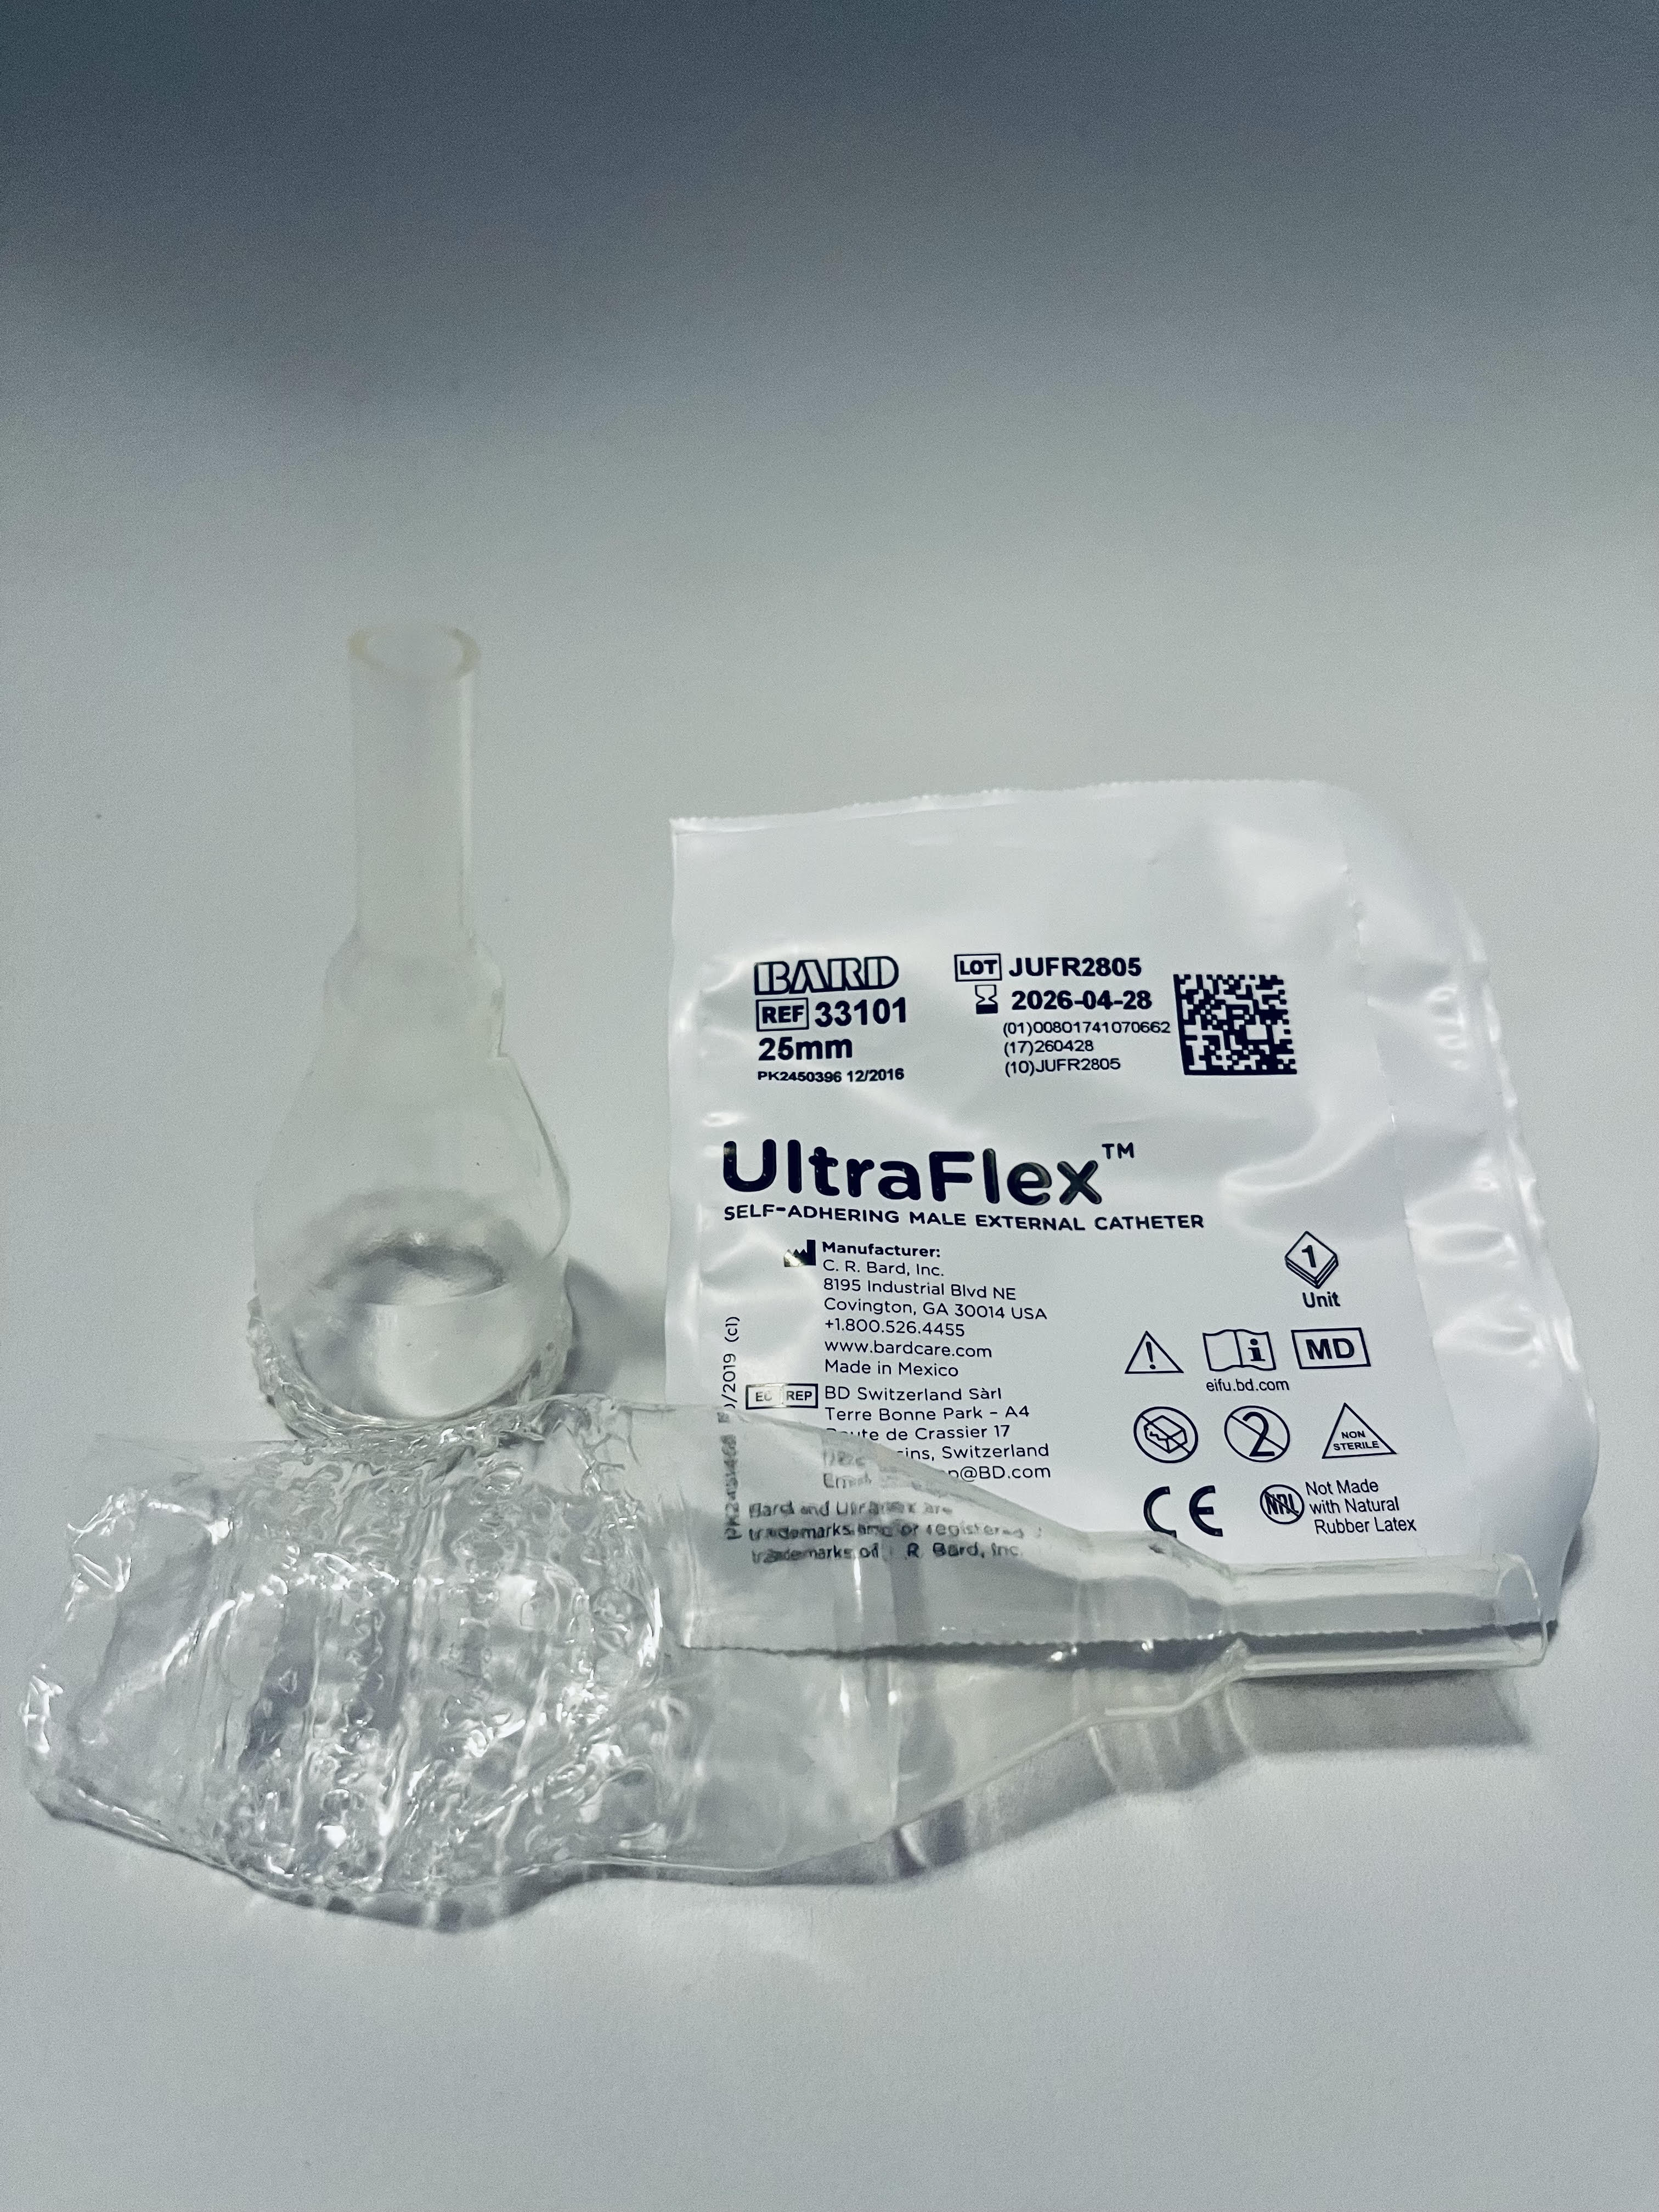 UltraFlex Male External Condom Catheters 29mm UltraFlex Male External Condom Catheters 29mm UltraFlex External Condom Catheter by Veteran Medical Supplies online store selling catheters, drainage bags, urinary kits centrally located in Kansas City Missouri shipping to the entire United States